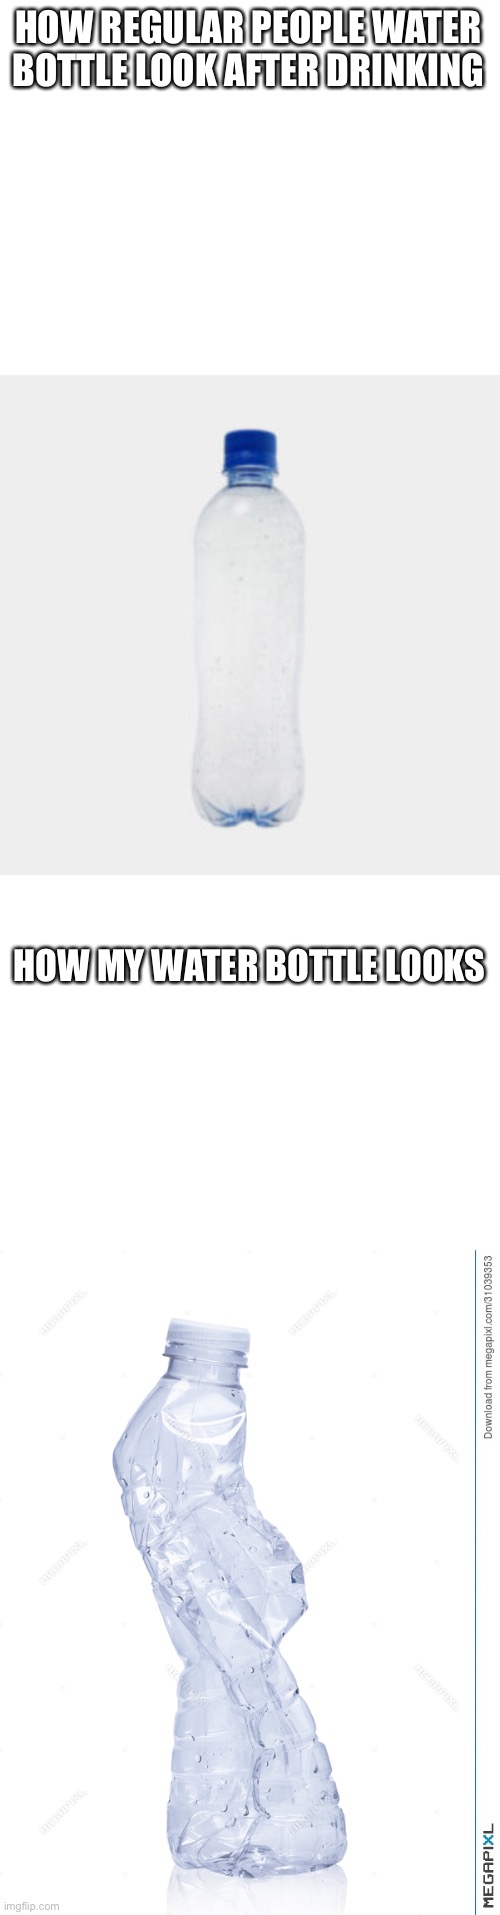 I GOTTA SQUEEZE IT WHILE DRINKING IM SORRY | HOW REGULAR PEOPLE WATER BOTTLE LOOK AFTER DRINKING; HOW MY WATER BOTTLE LOOKS | image tagged in blank white template,water,stayhydratedkids,amitheonlyonethatdoesthis,amiweird | made w/ Imgflip meme maker